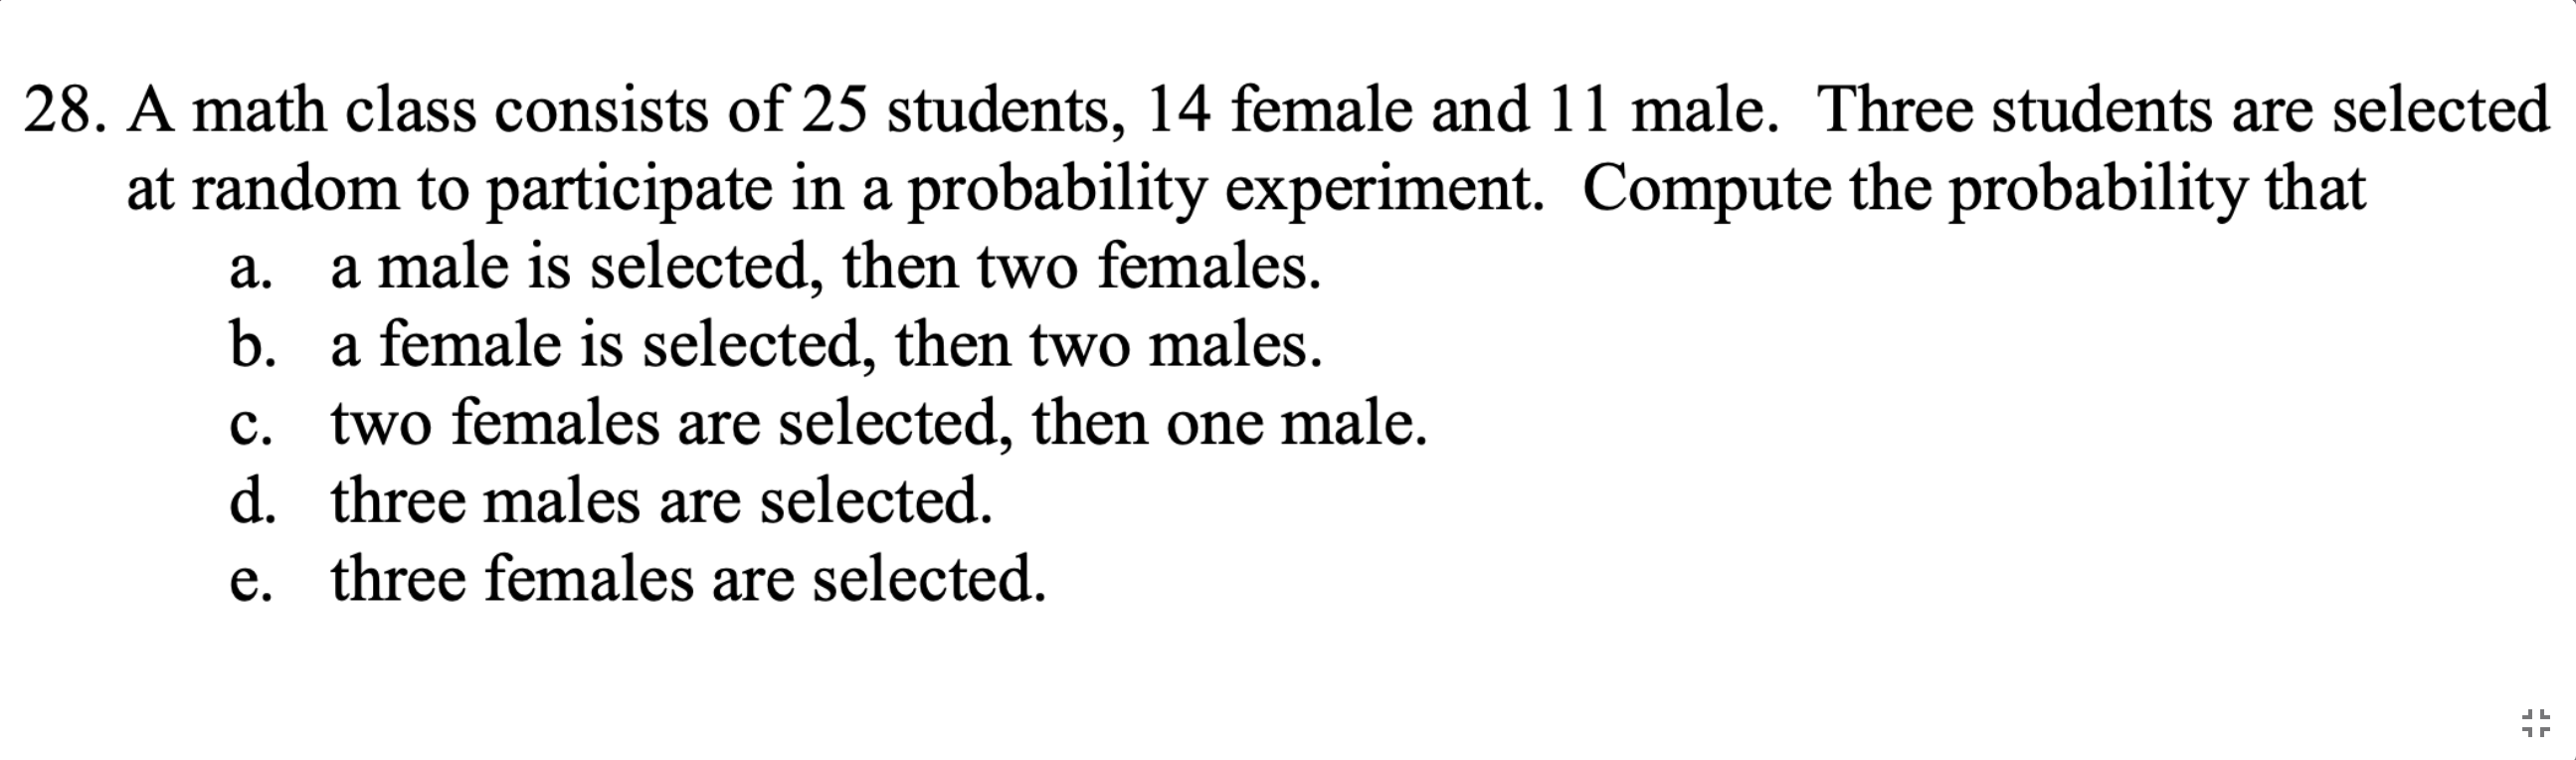 A math class consists of 25 students, 14 female and 11 male. Three students are selected
at random to participate in a probability experiment. Compute the probability that
a male is selected, then two females.
a.
b. a female is selected, then two males.
c. two females are selected, then one male.
d. three males are selected.
e. three females are selected.
